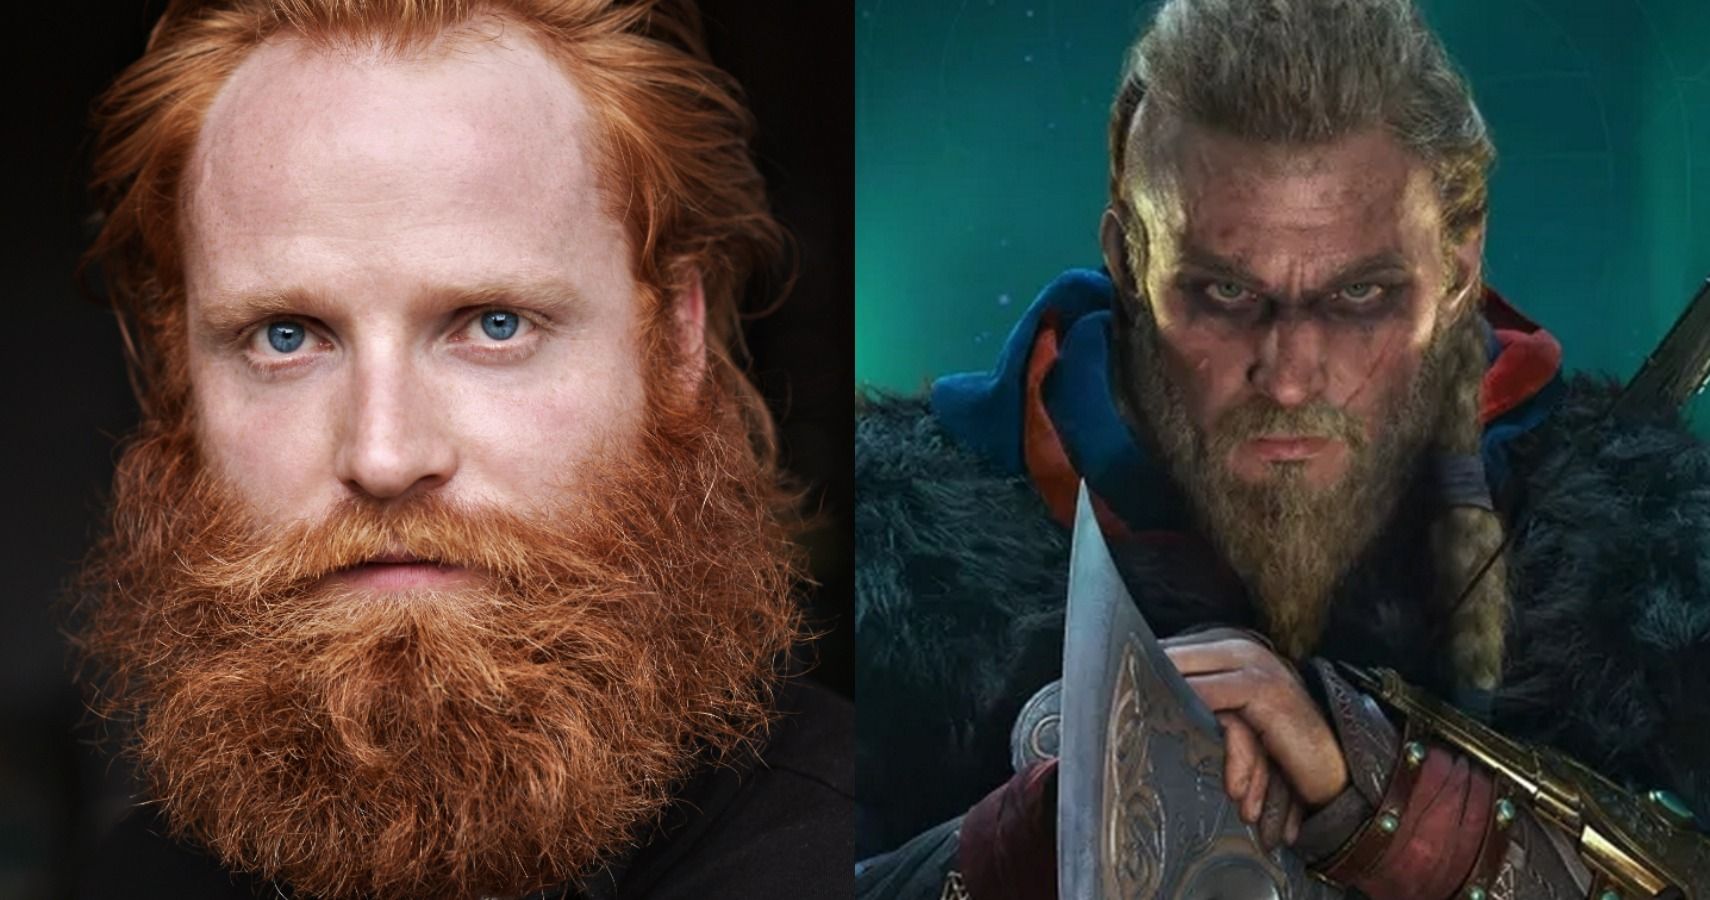 Magnus Bruun playing Cnut playing Assassin's Creed playing male